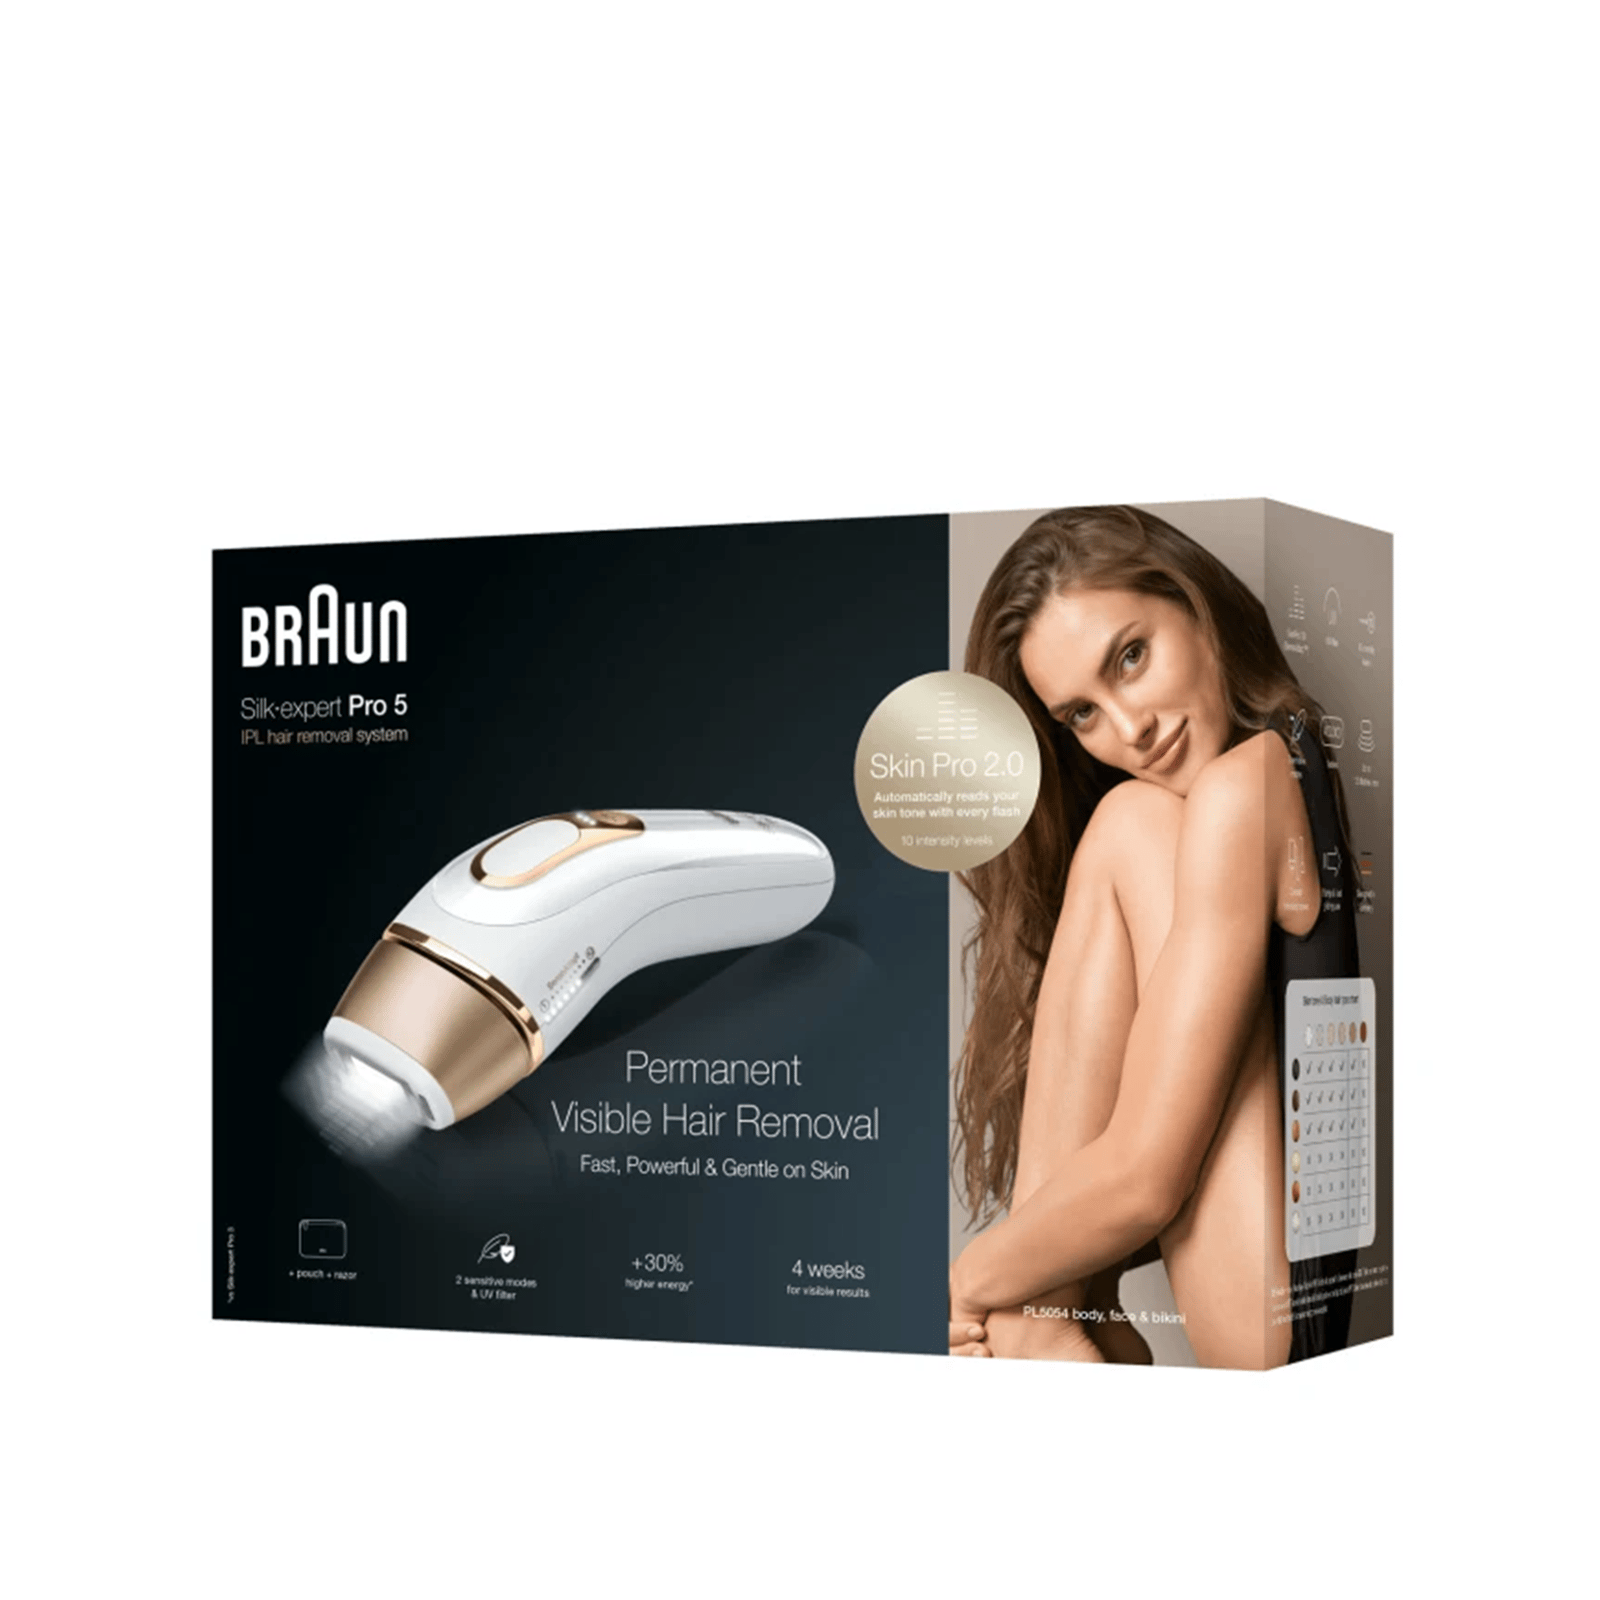 https://static.beautytocare.com/cdn-cgi/image/width=1600,height=1600,f=auto/media/catalog/product//b/r/braun-silk-expert-pro-5-ipl-hair-removal-system-gold-pl5054_1.png